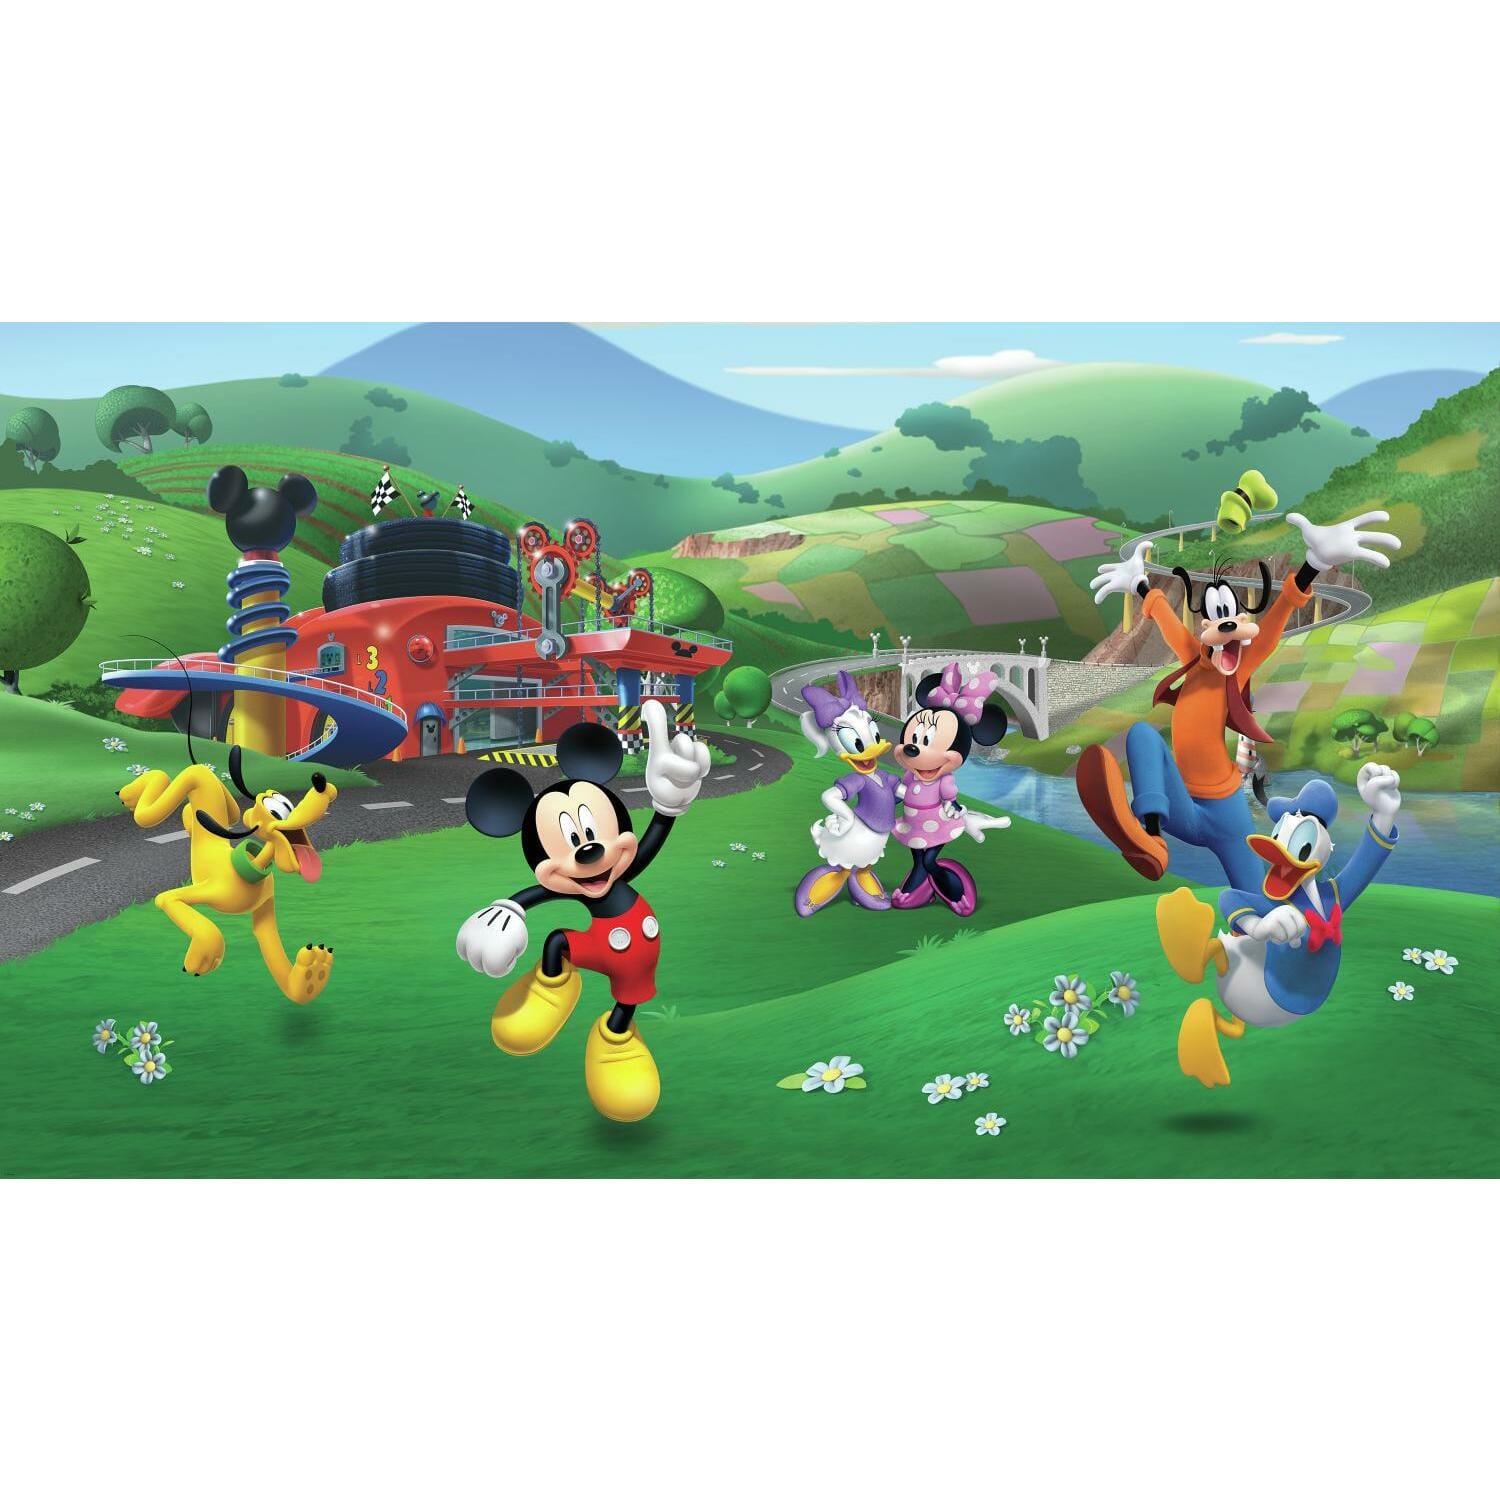 RoomMates Mickey And The Roadster Racers XL Prepasted Wall Mural